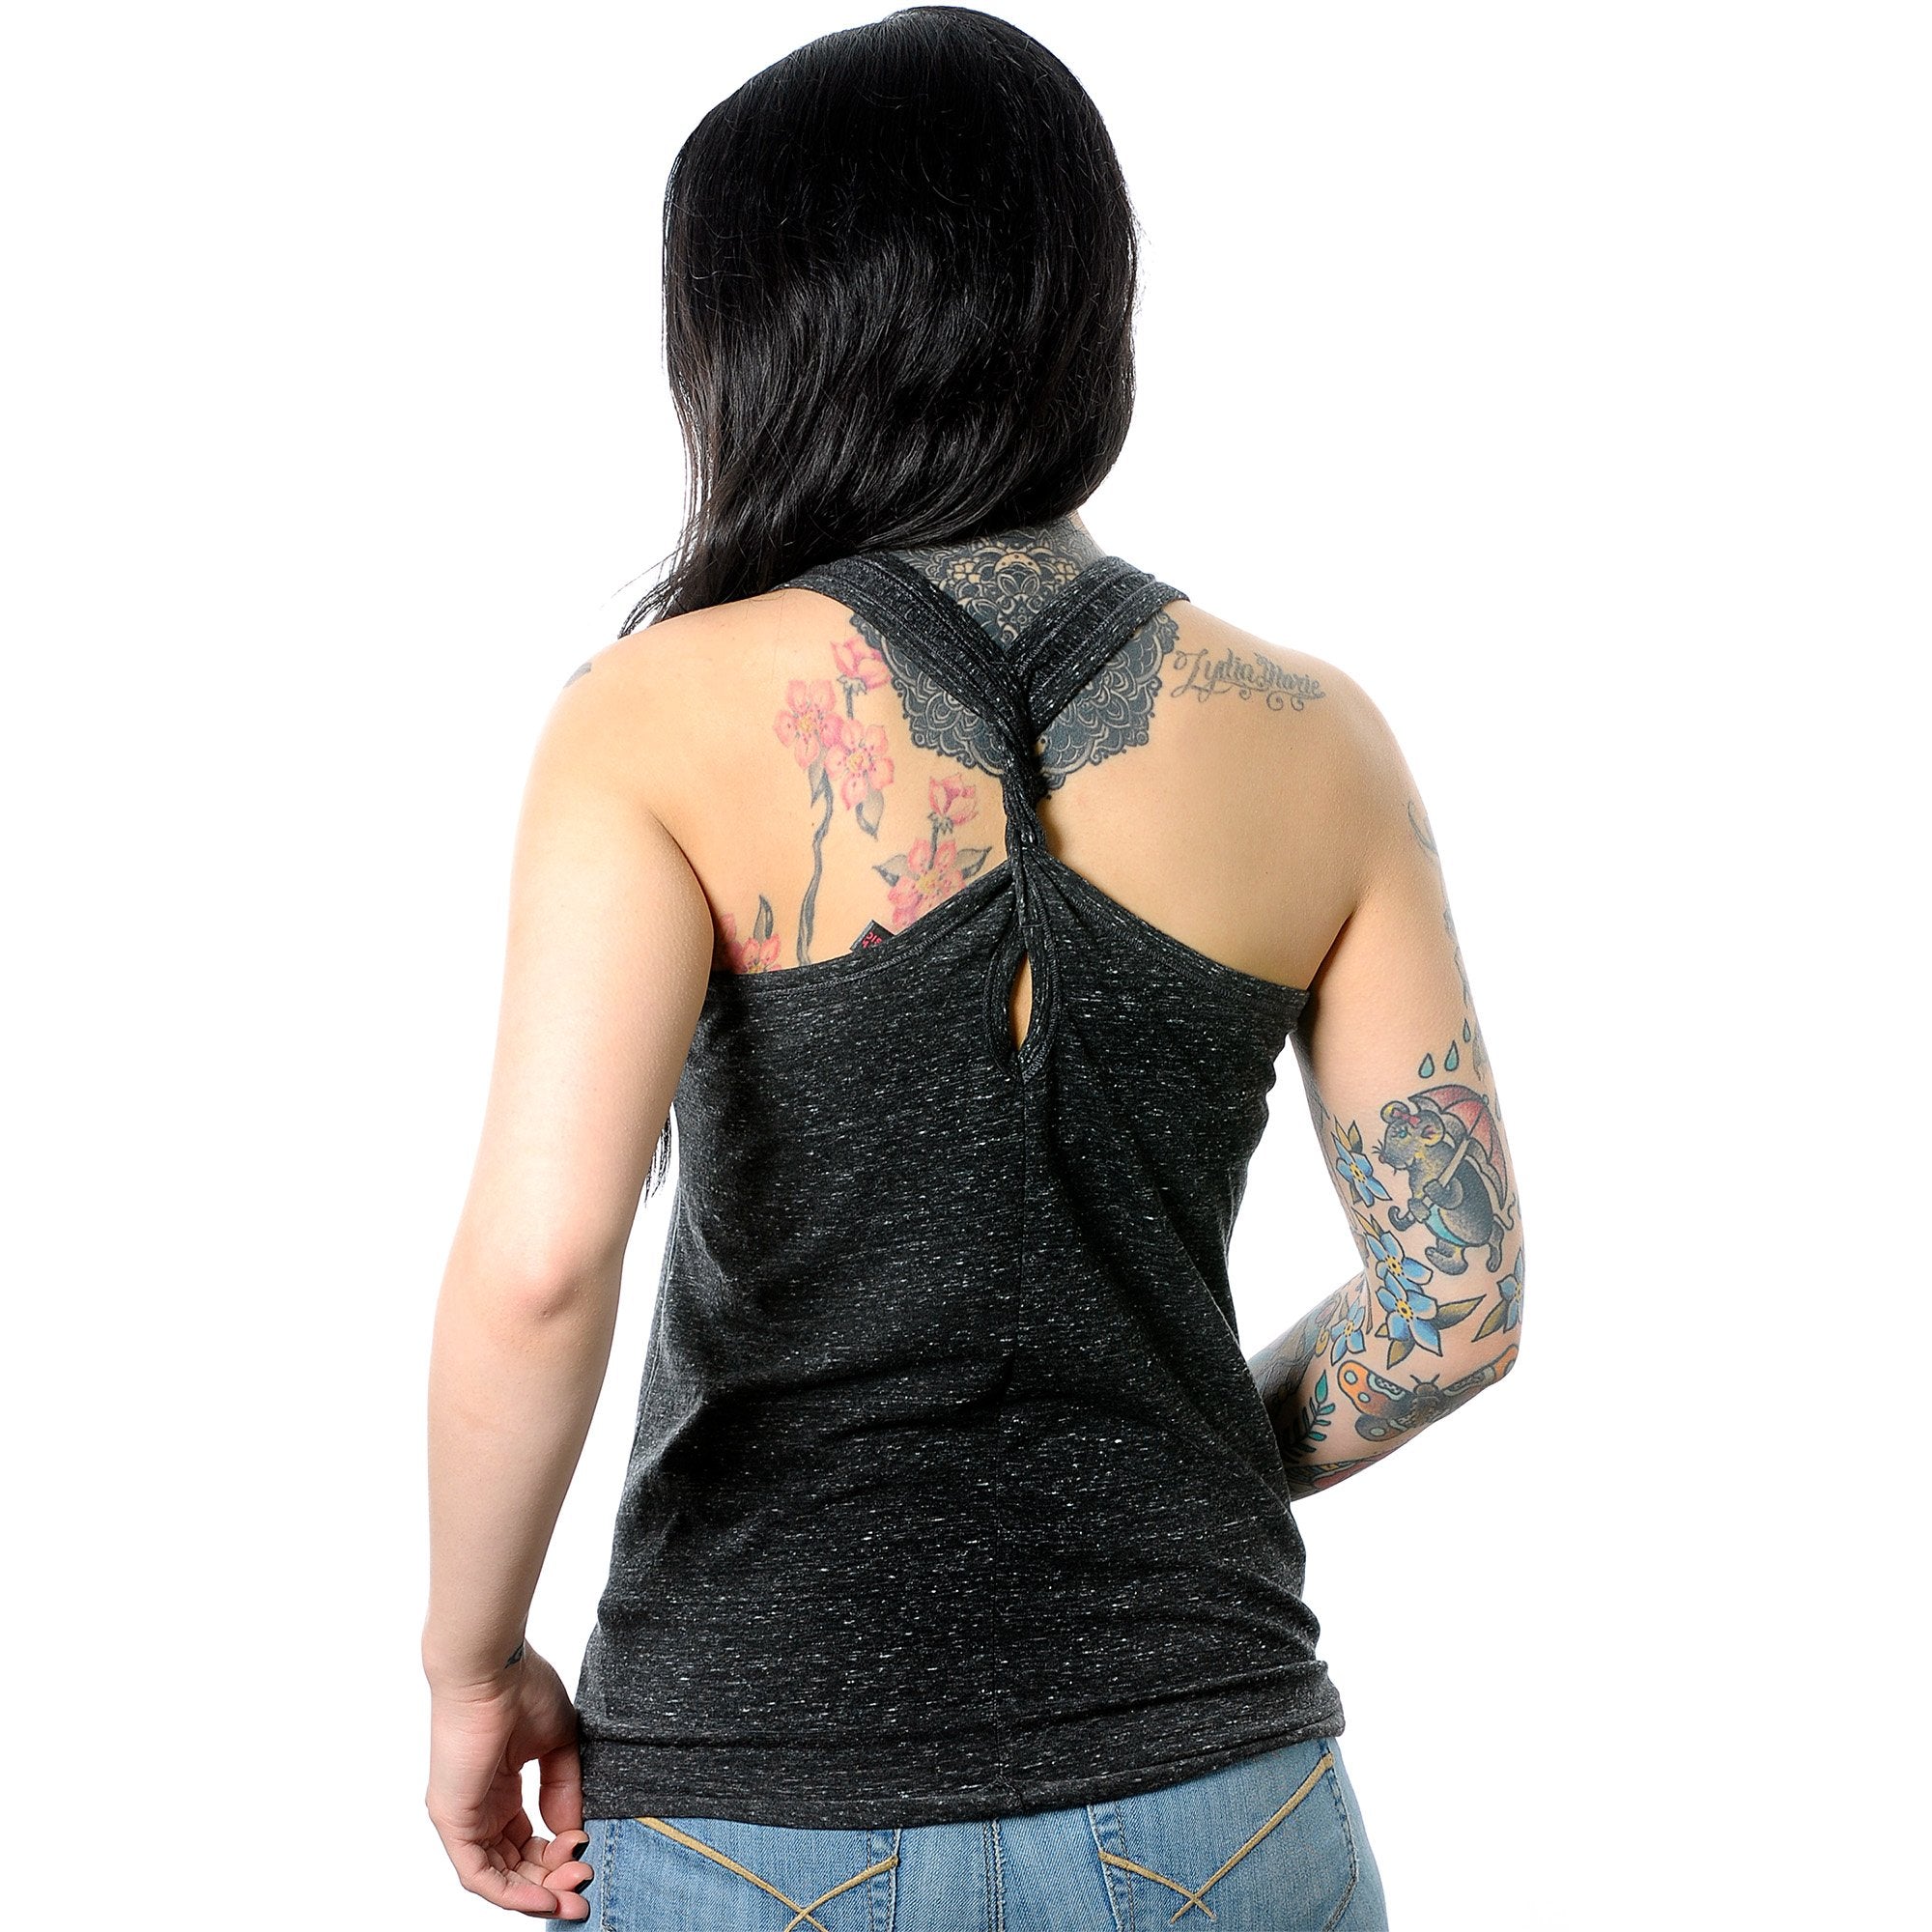 Sorry I'm Late, I Didn't Want To Come Black Gray Cosmic Twist Back Tank Top